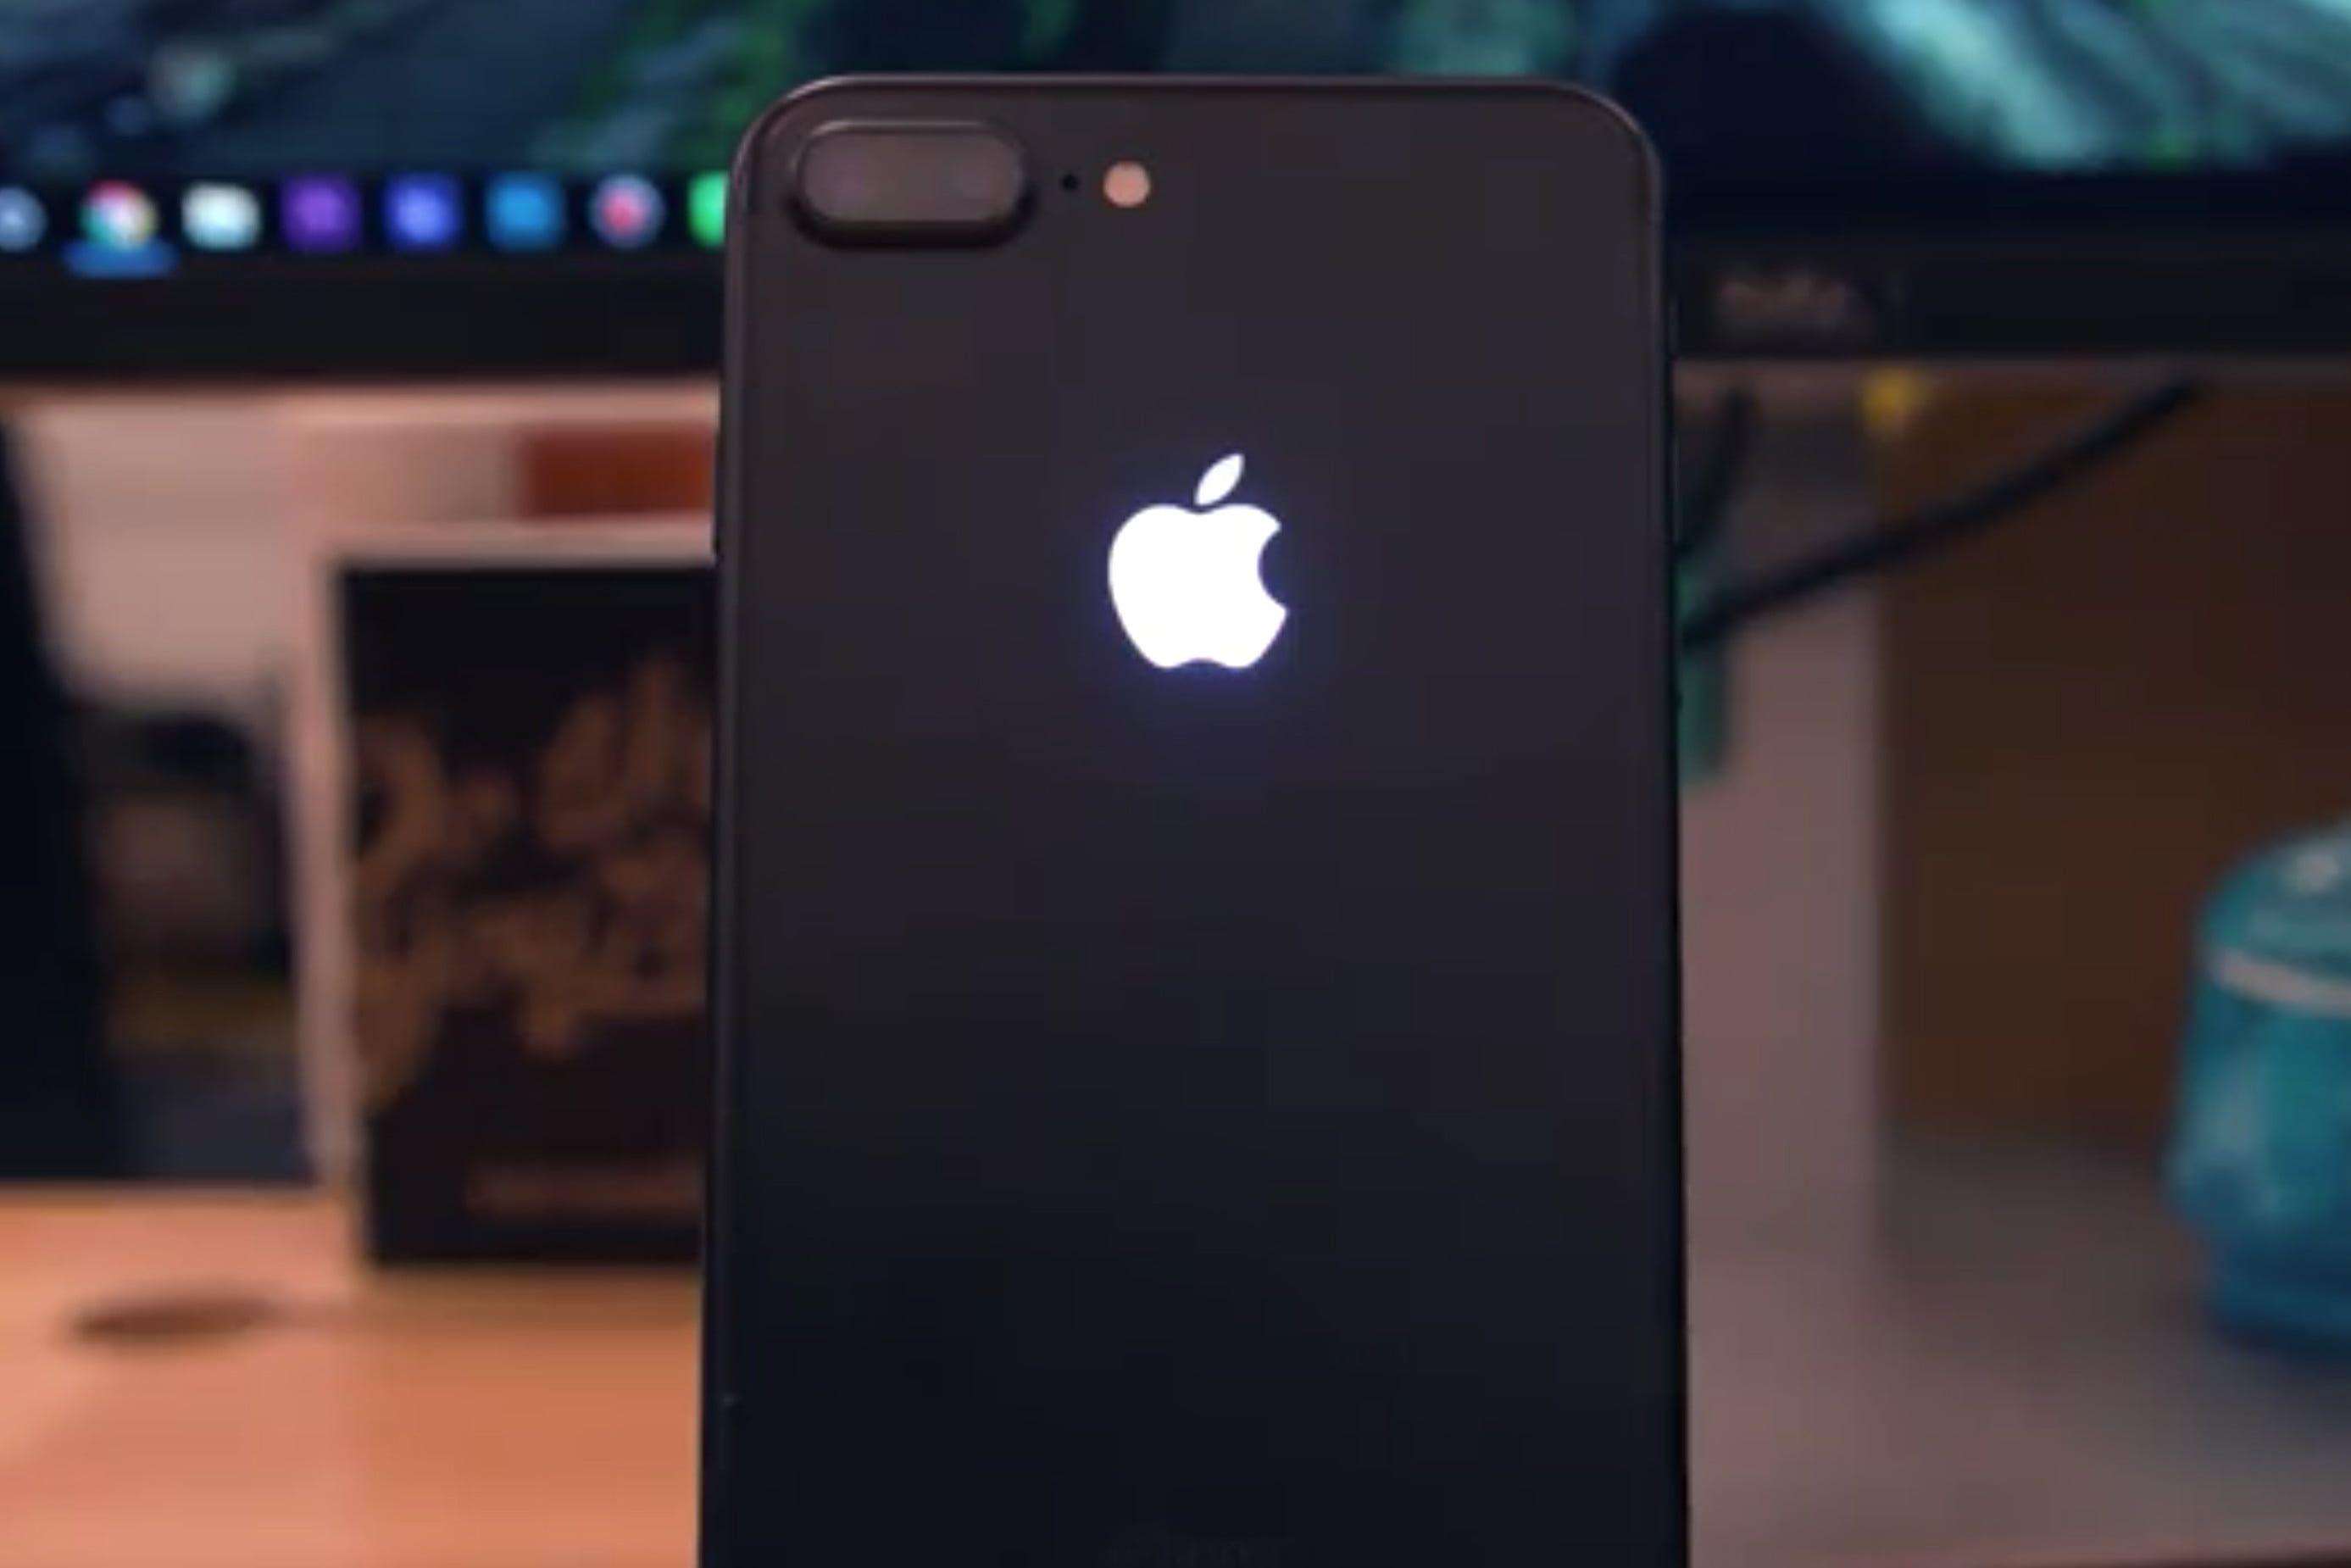 Glowing Apple Logo - How to Make the Apple Logo on an iPhone 7 Light Up | Digital Trends